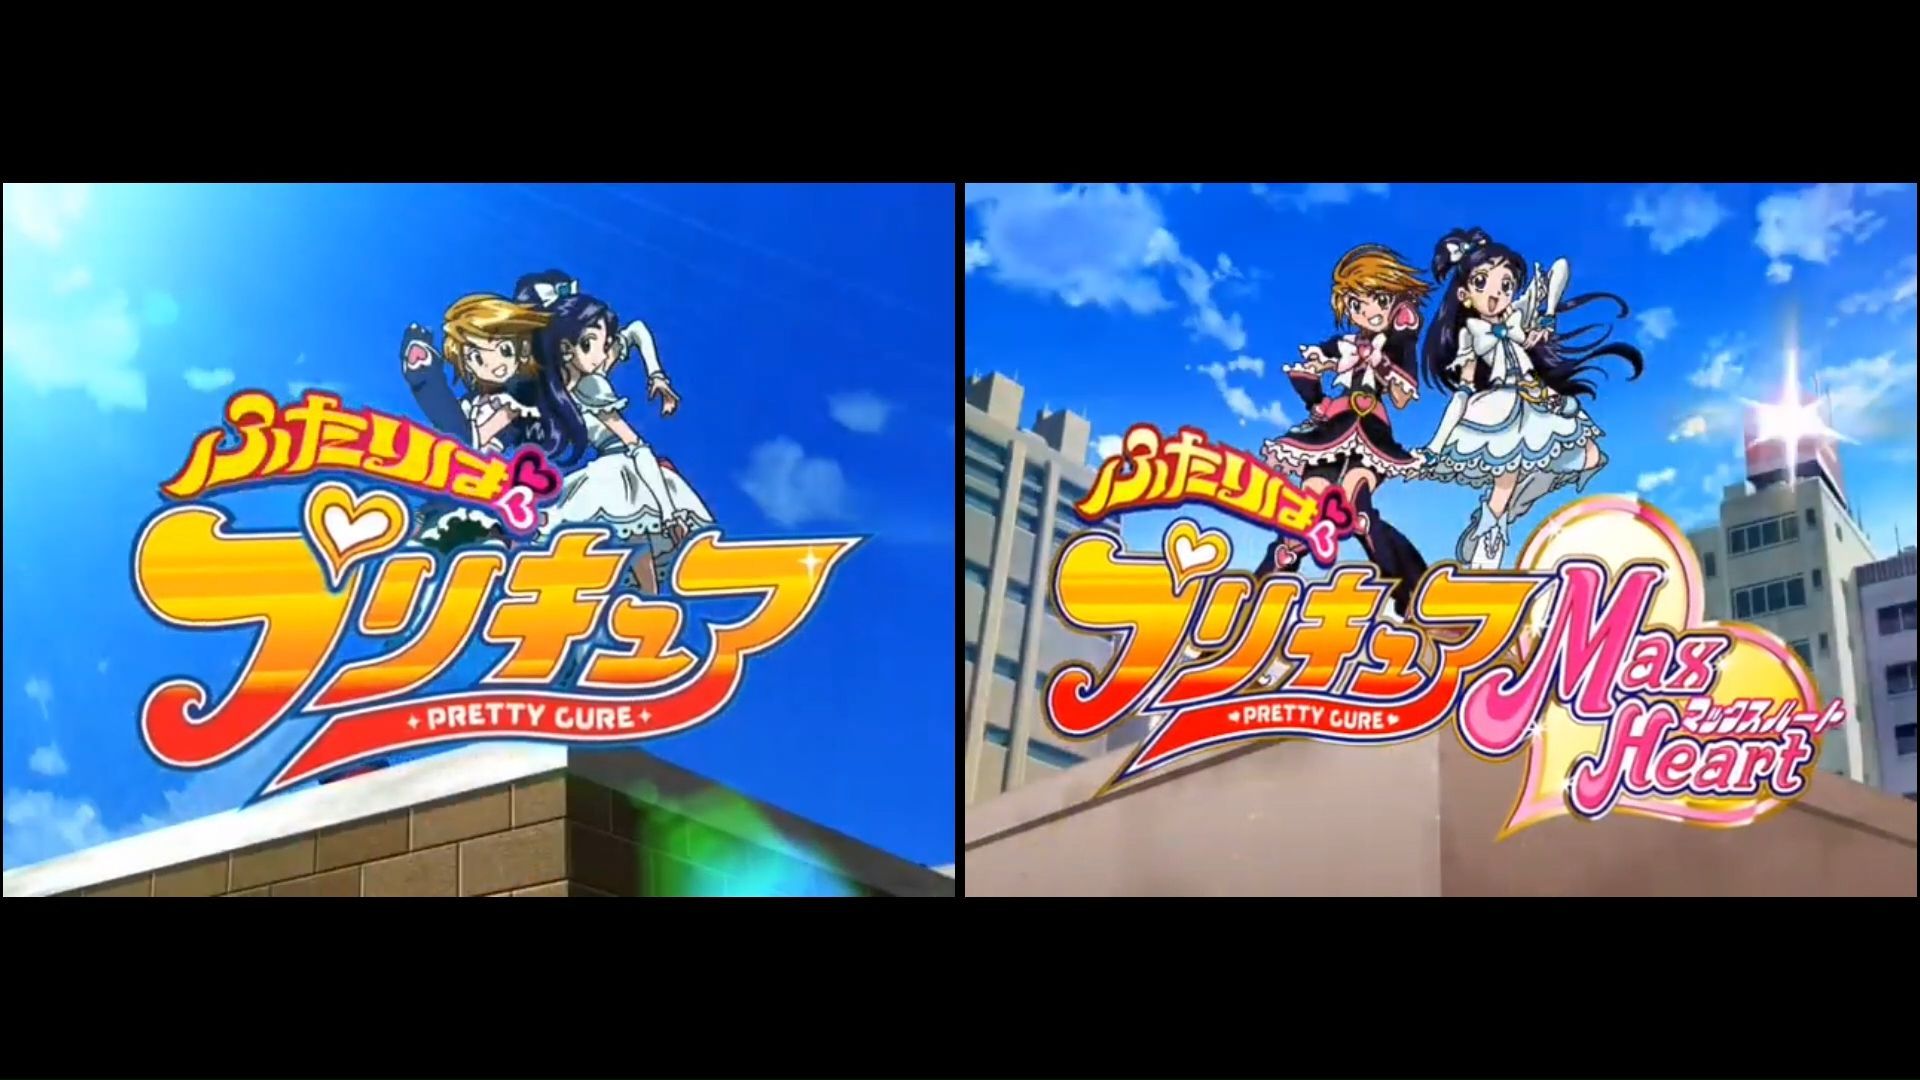 yes pretty cure 5 go go - Ep28 HD Watch - video Dailymotion